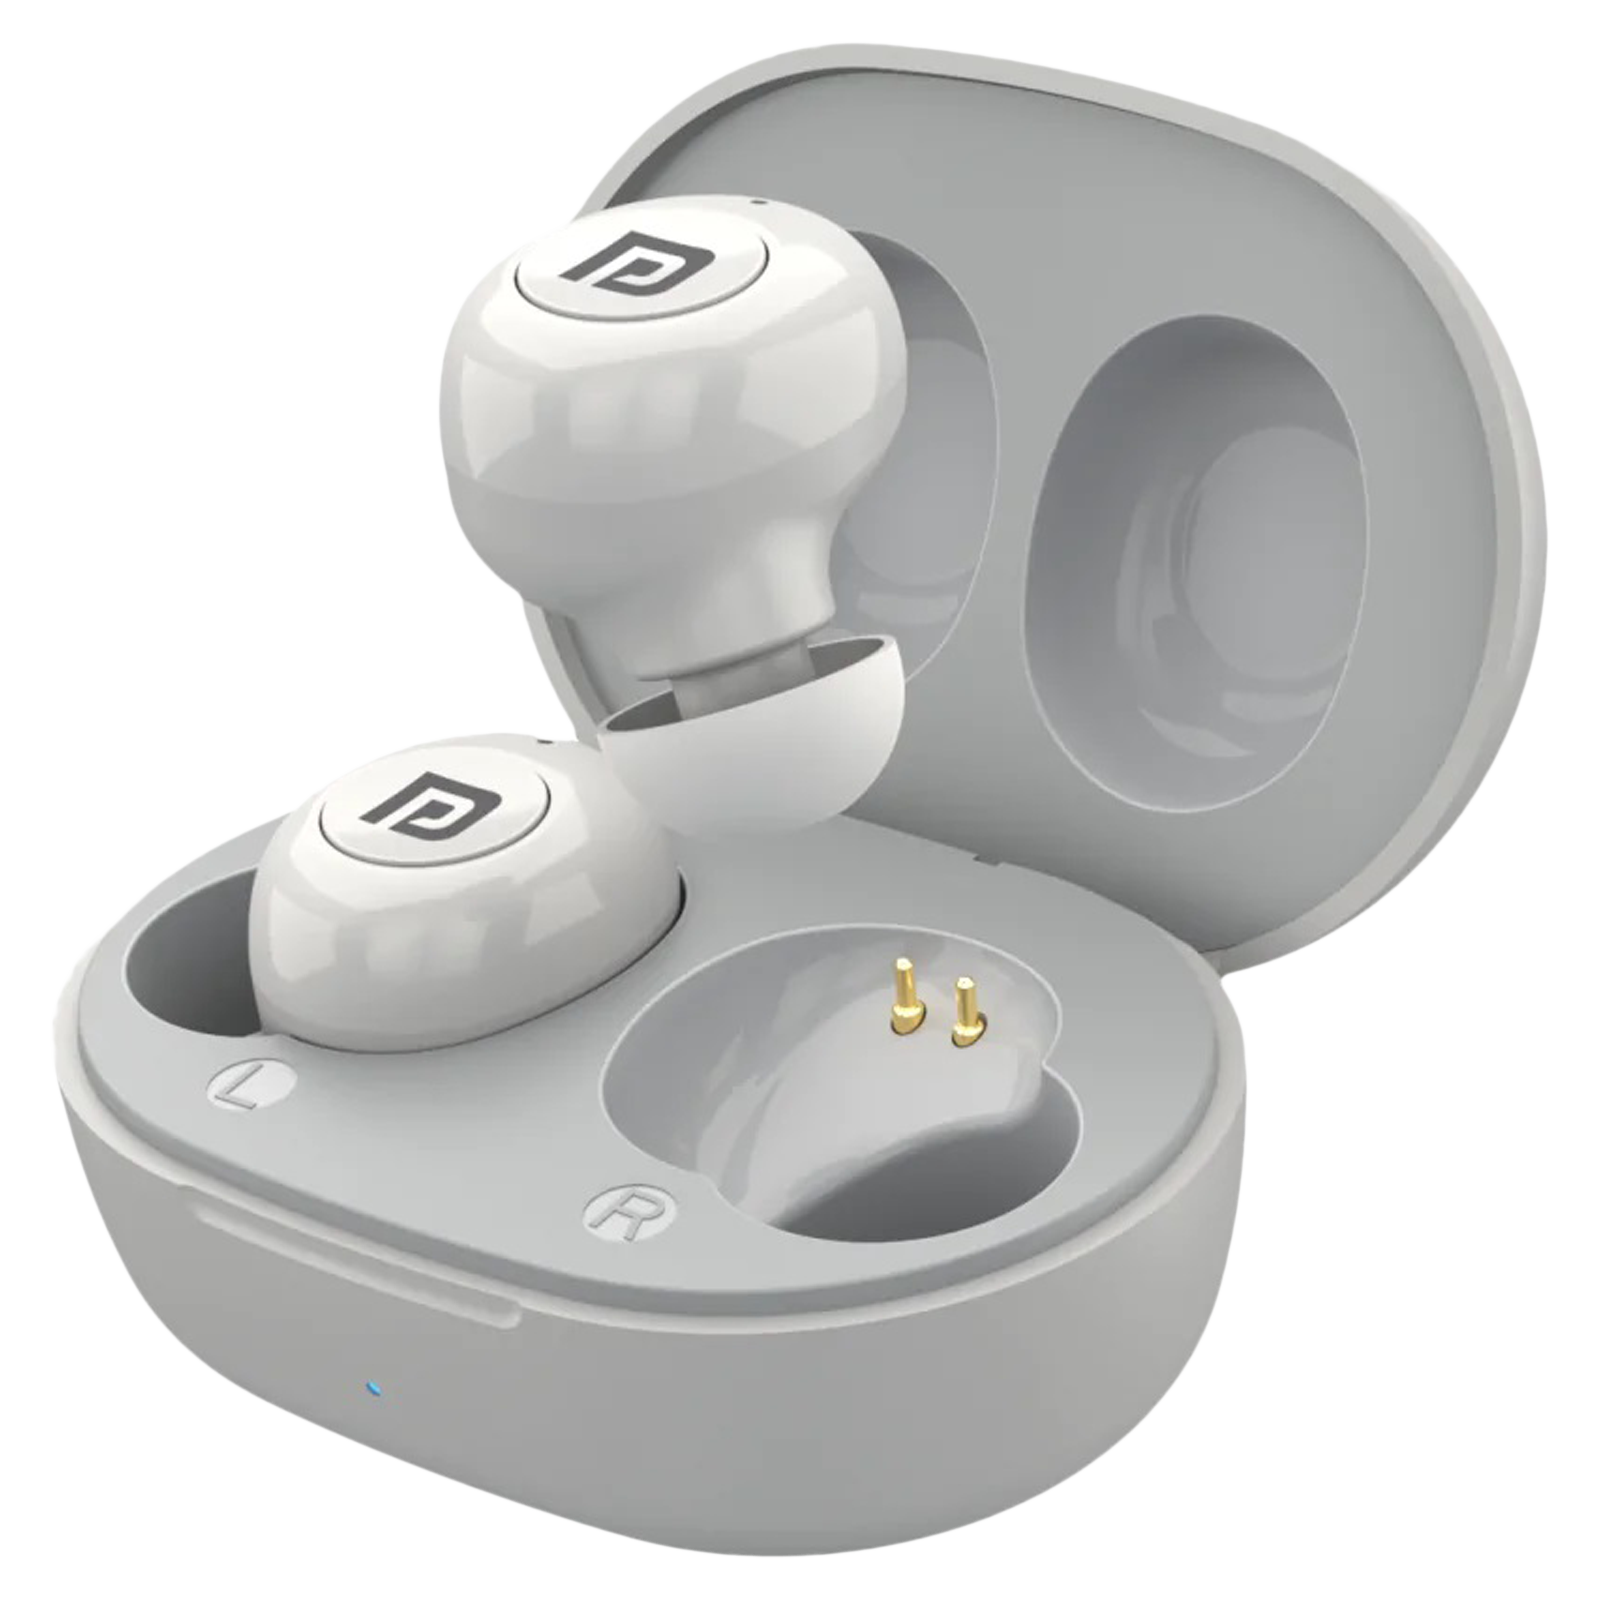 PORTRONICS Harmonics Twins S3 POR 1651 TWS Earbuds (IPX4 Water Resistant, Up to 20 Hours Playtime, White)